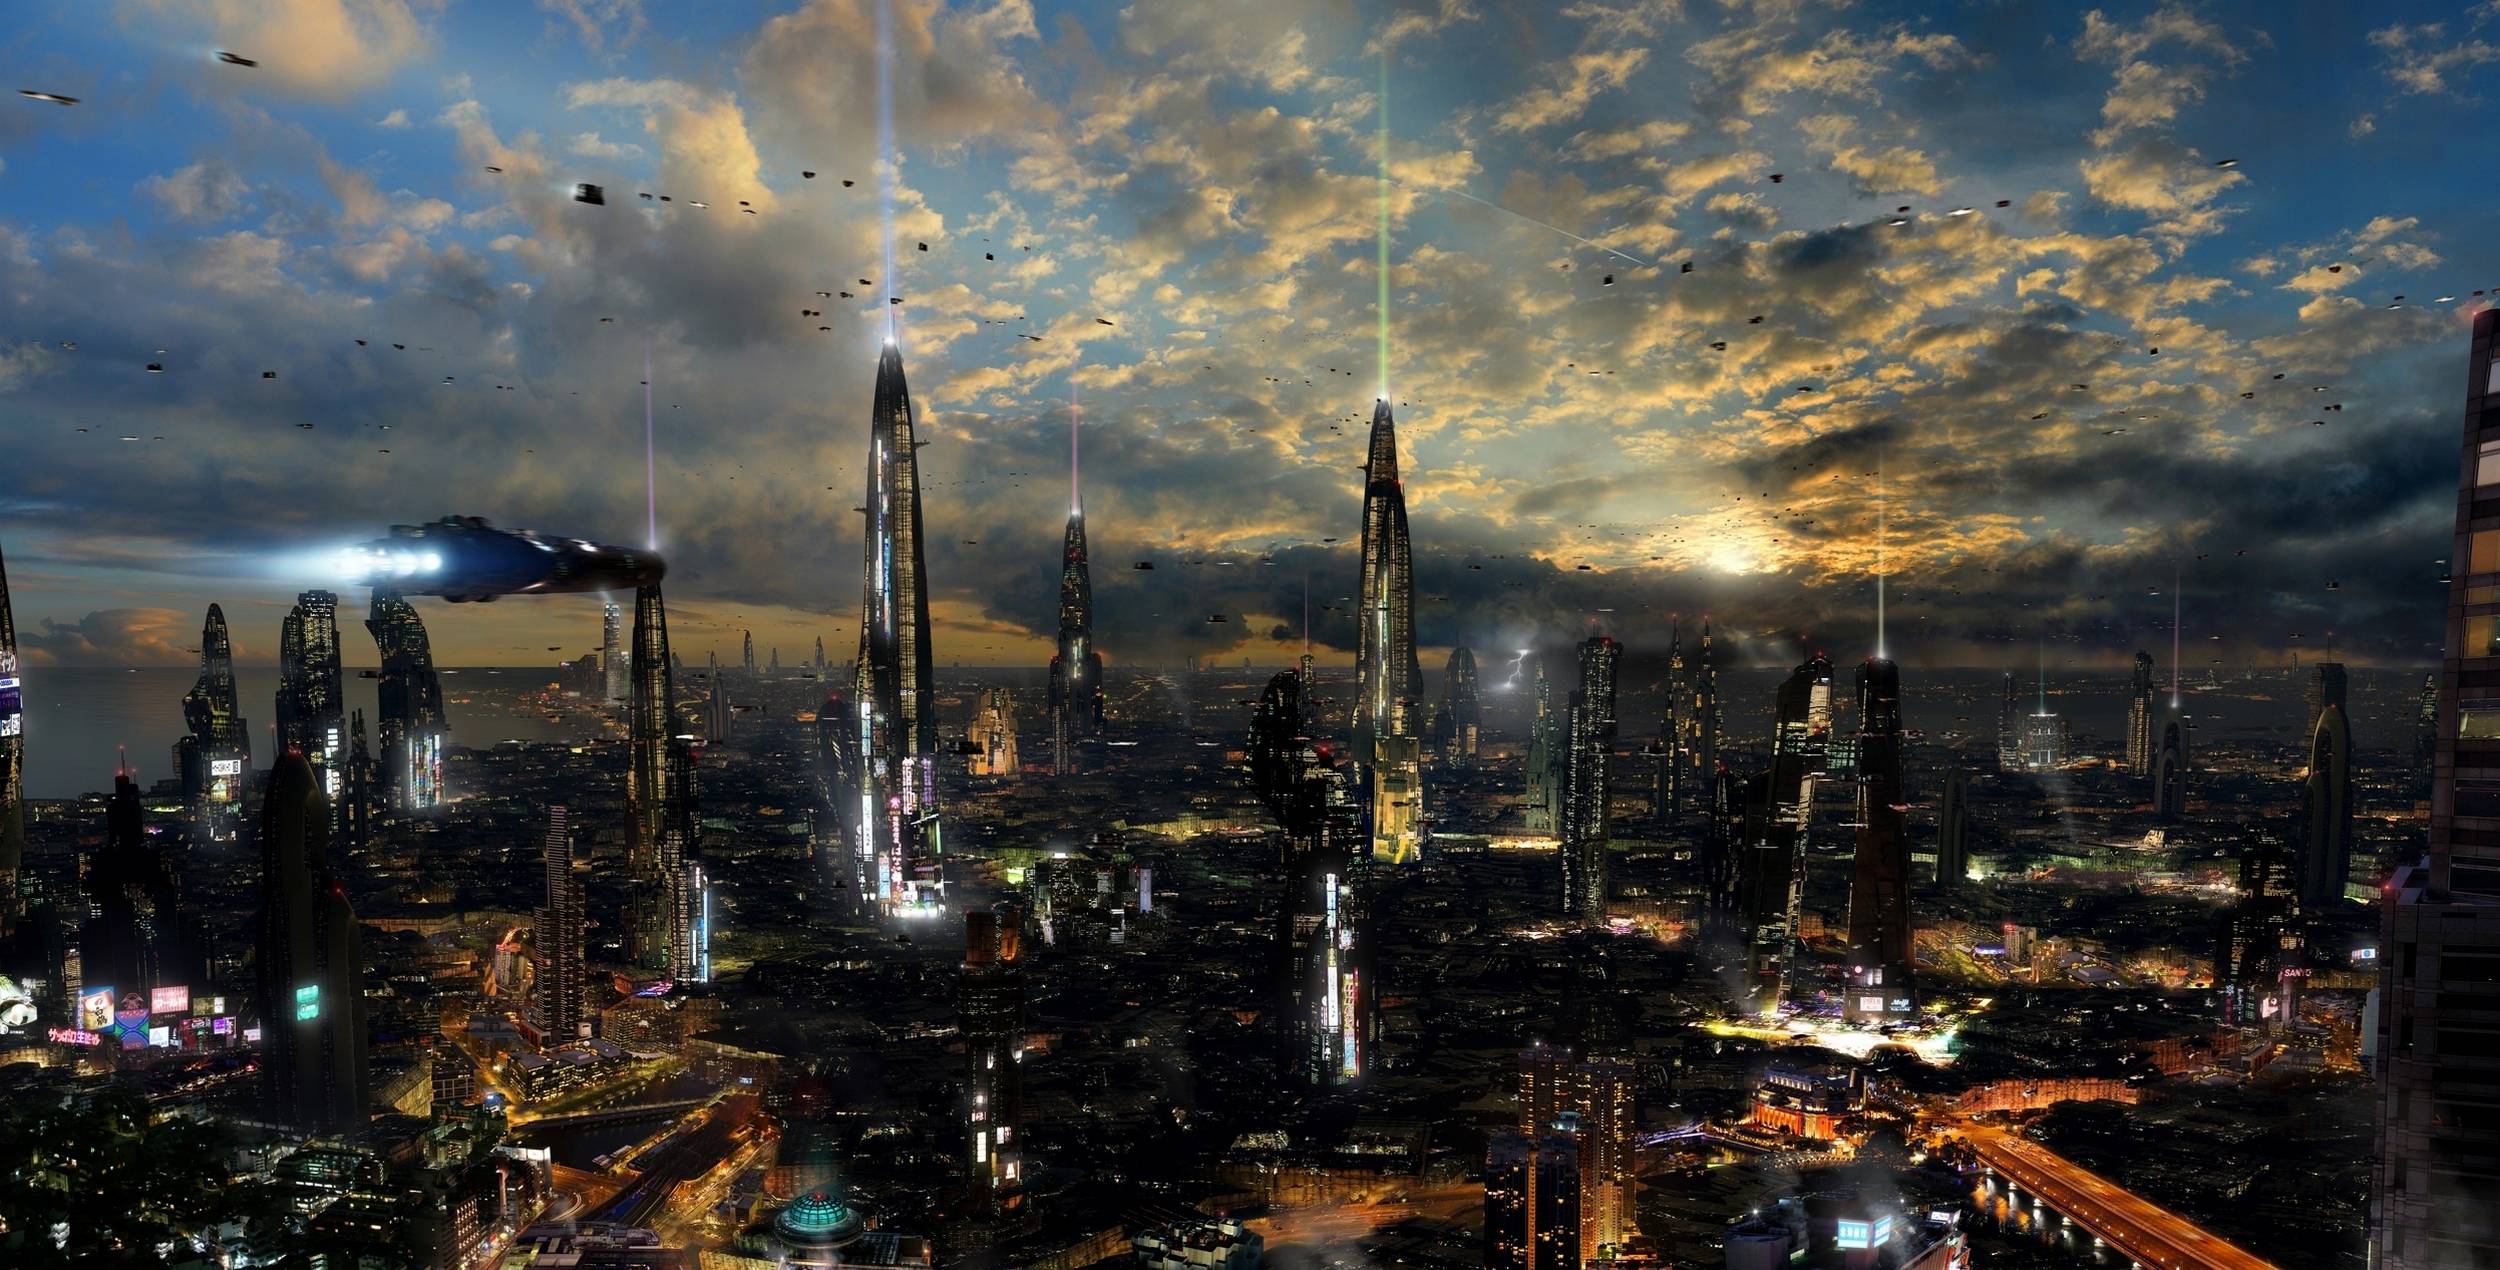 Future City HD Wallpapers